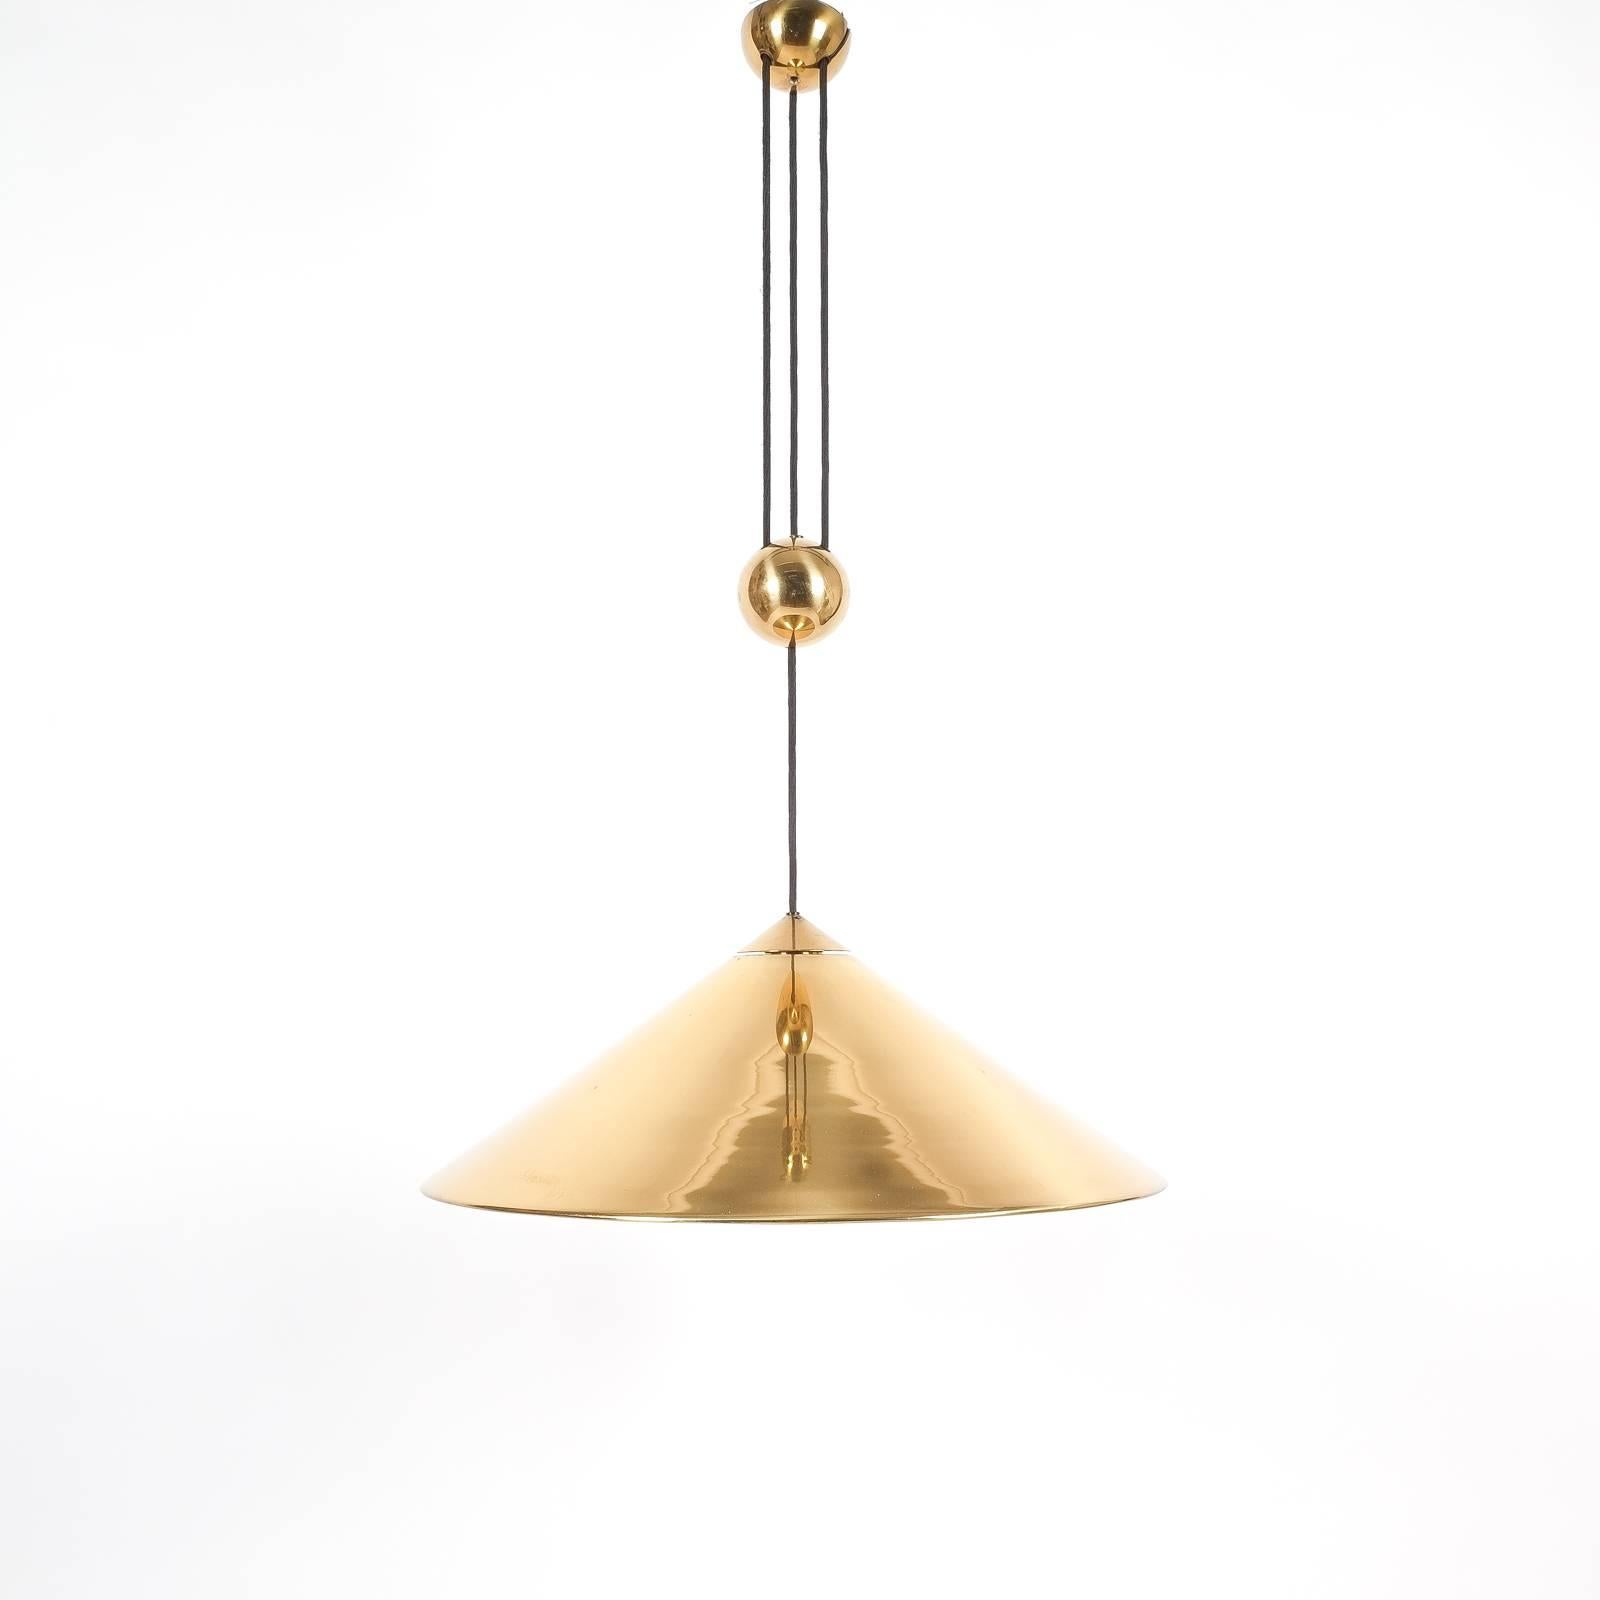 Elegant highly polished brass pendant by Florian Schulz/Germany with a shiny brass 22.5 inch shade and heavy counterweight to easily adjust the light in height. Excellent condition, it holds one bulb with a maximum of 100 Watts. The height varies